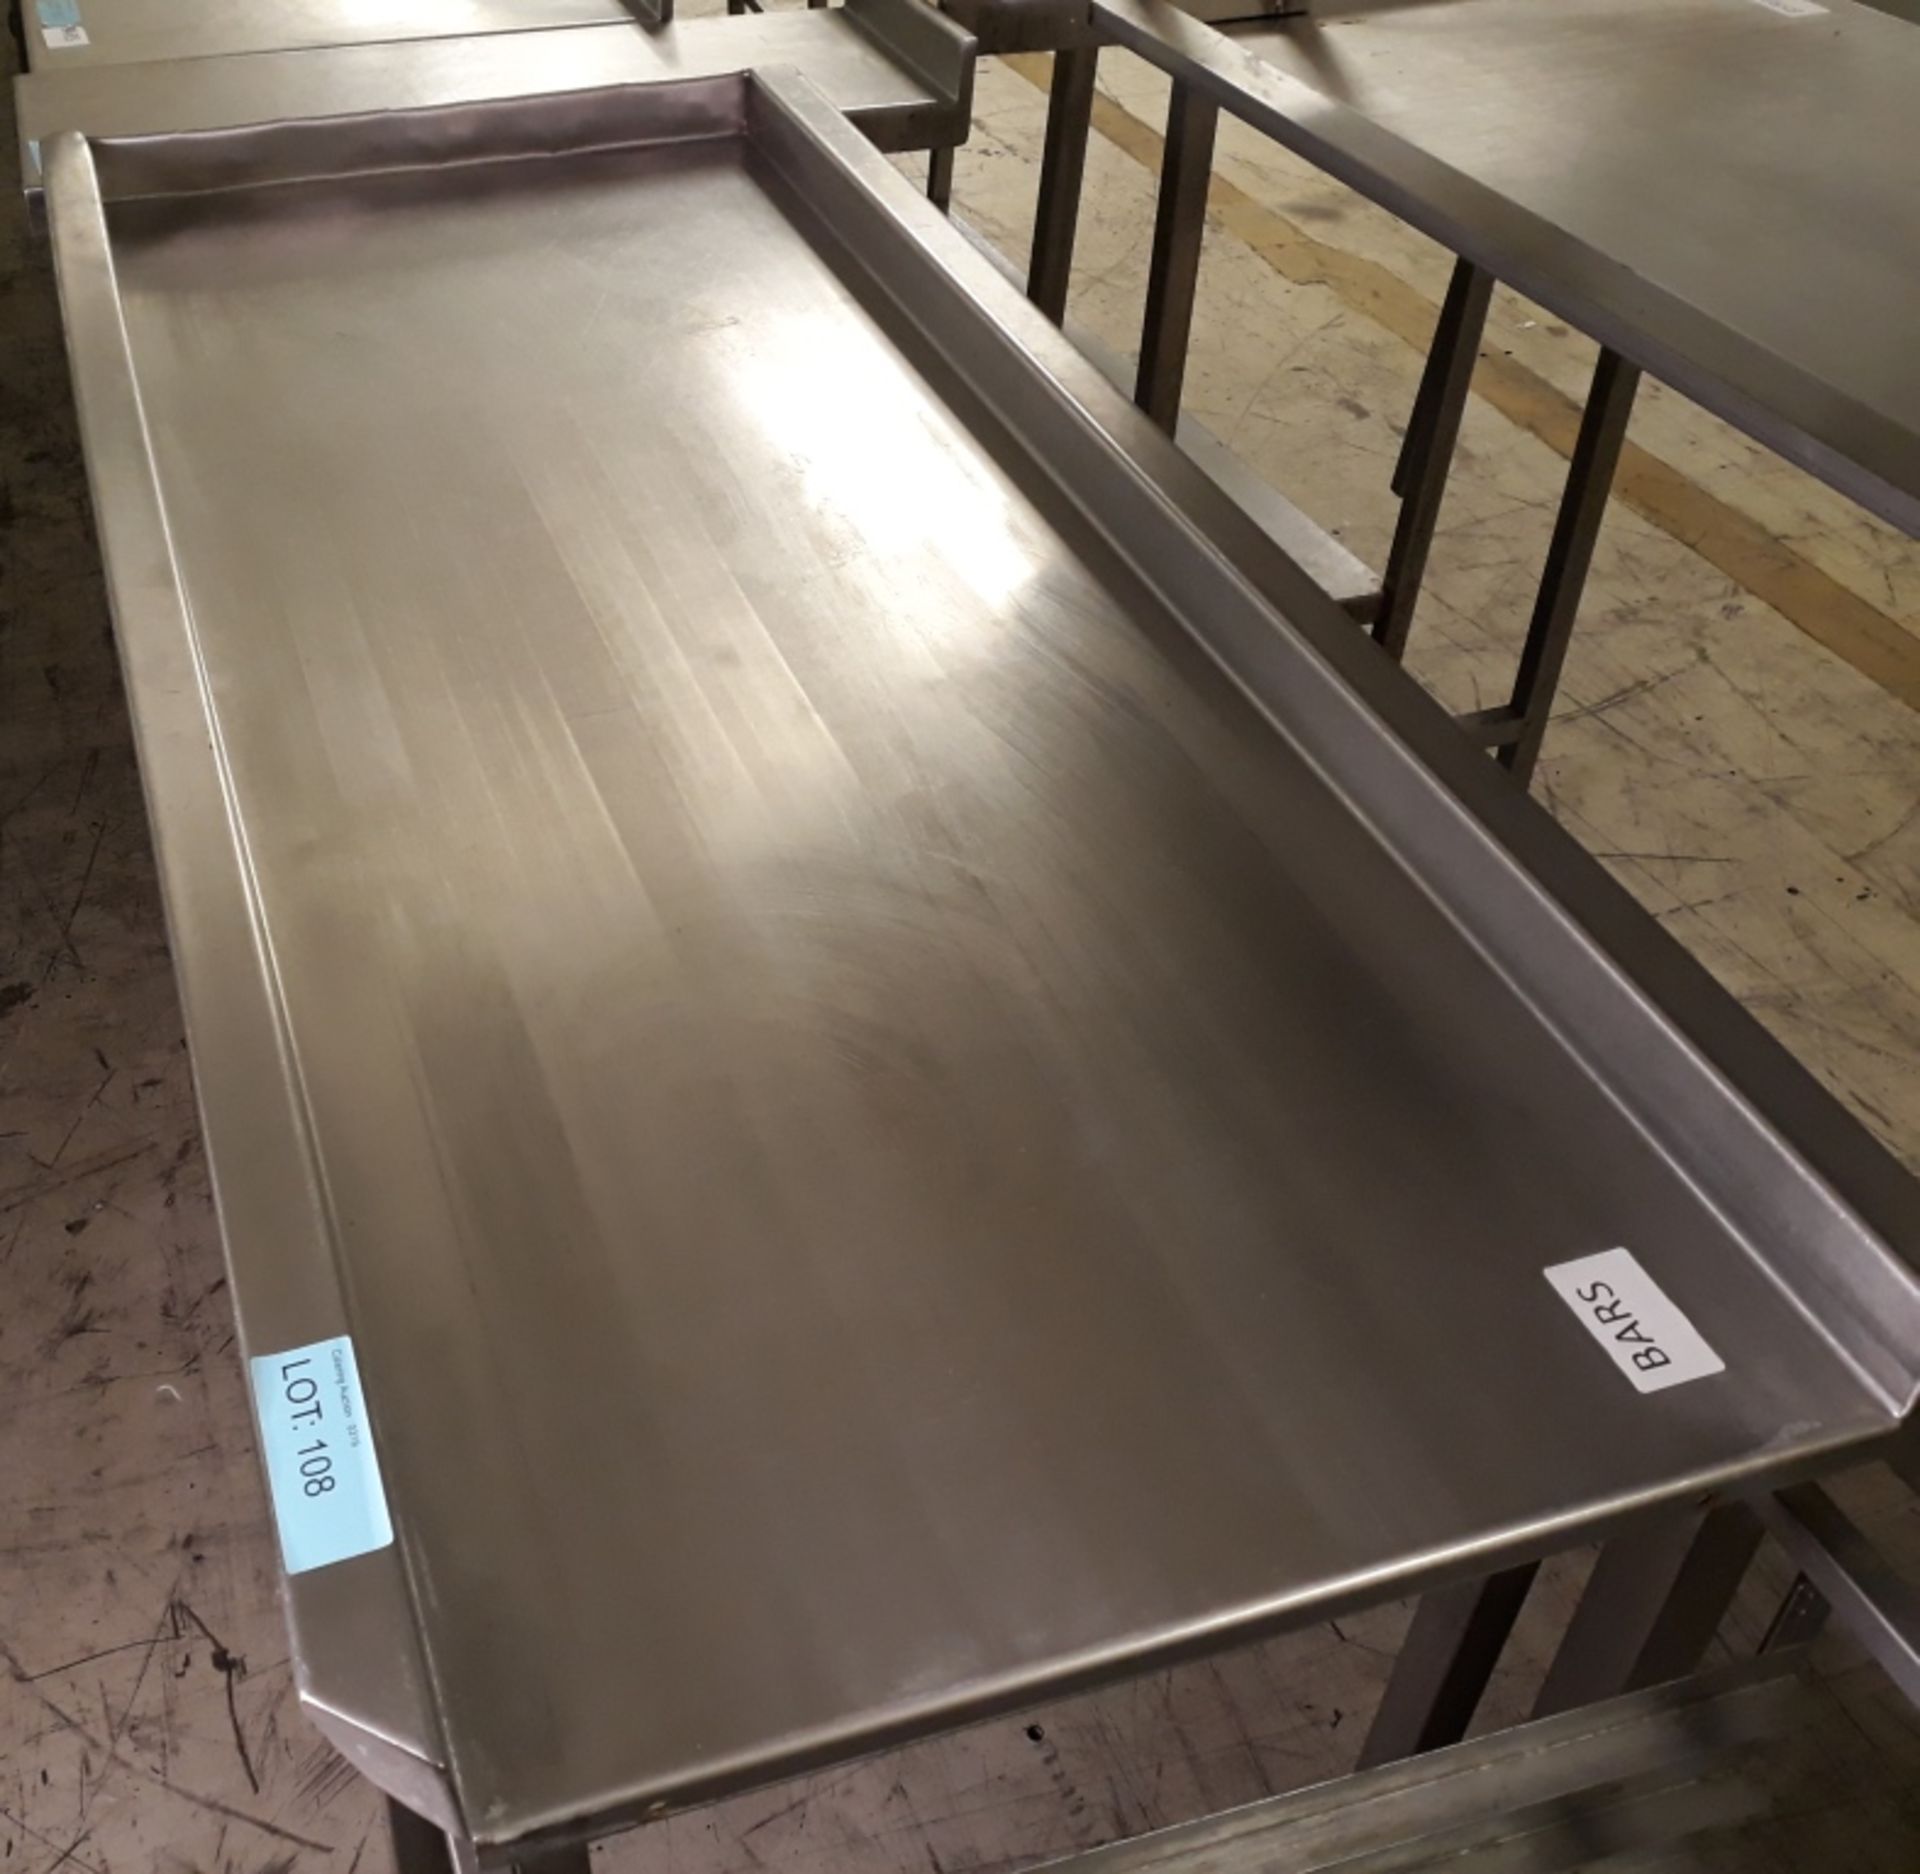 Stainless steel dishwasher table - 137 x 63cm. - Image 2 of 2